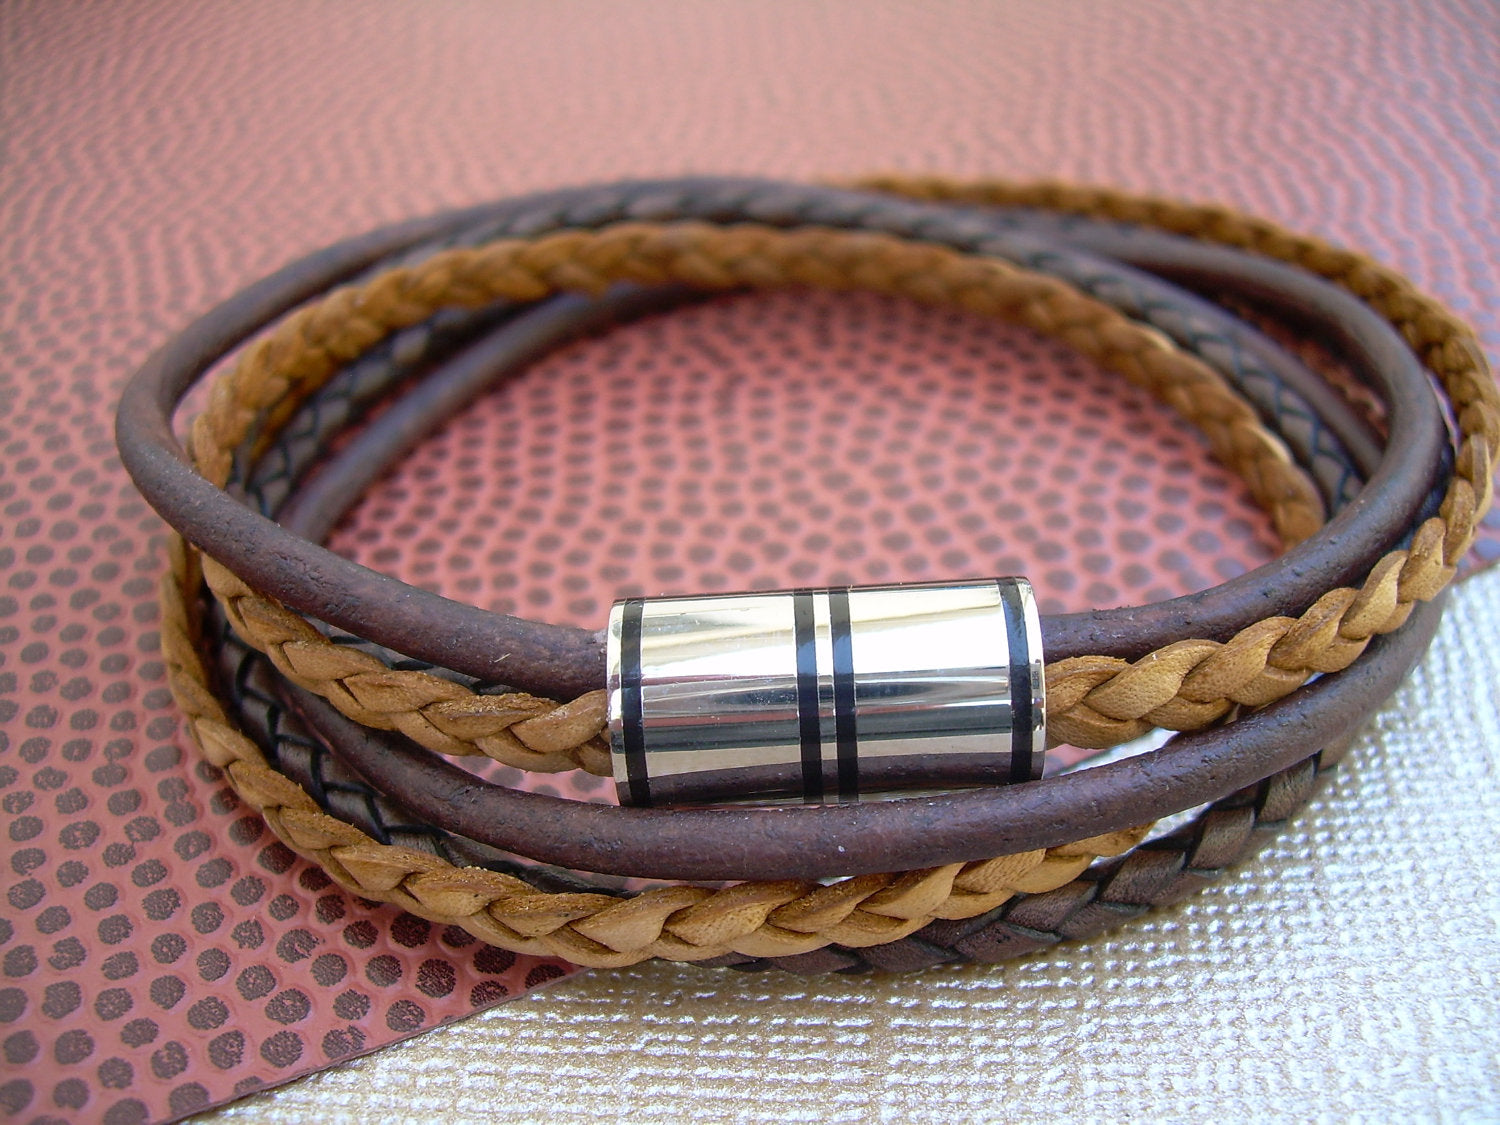 Handmade Double Wrap Mens Leather Bracelet with Stainless Steel Magnetic  Clasp,Leather Bracelet,Mens Gift,Mens Bracelet,Mens Jewelry,Gift for him